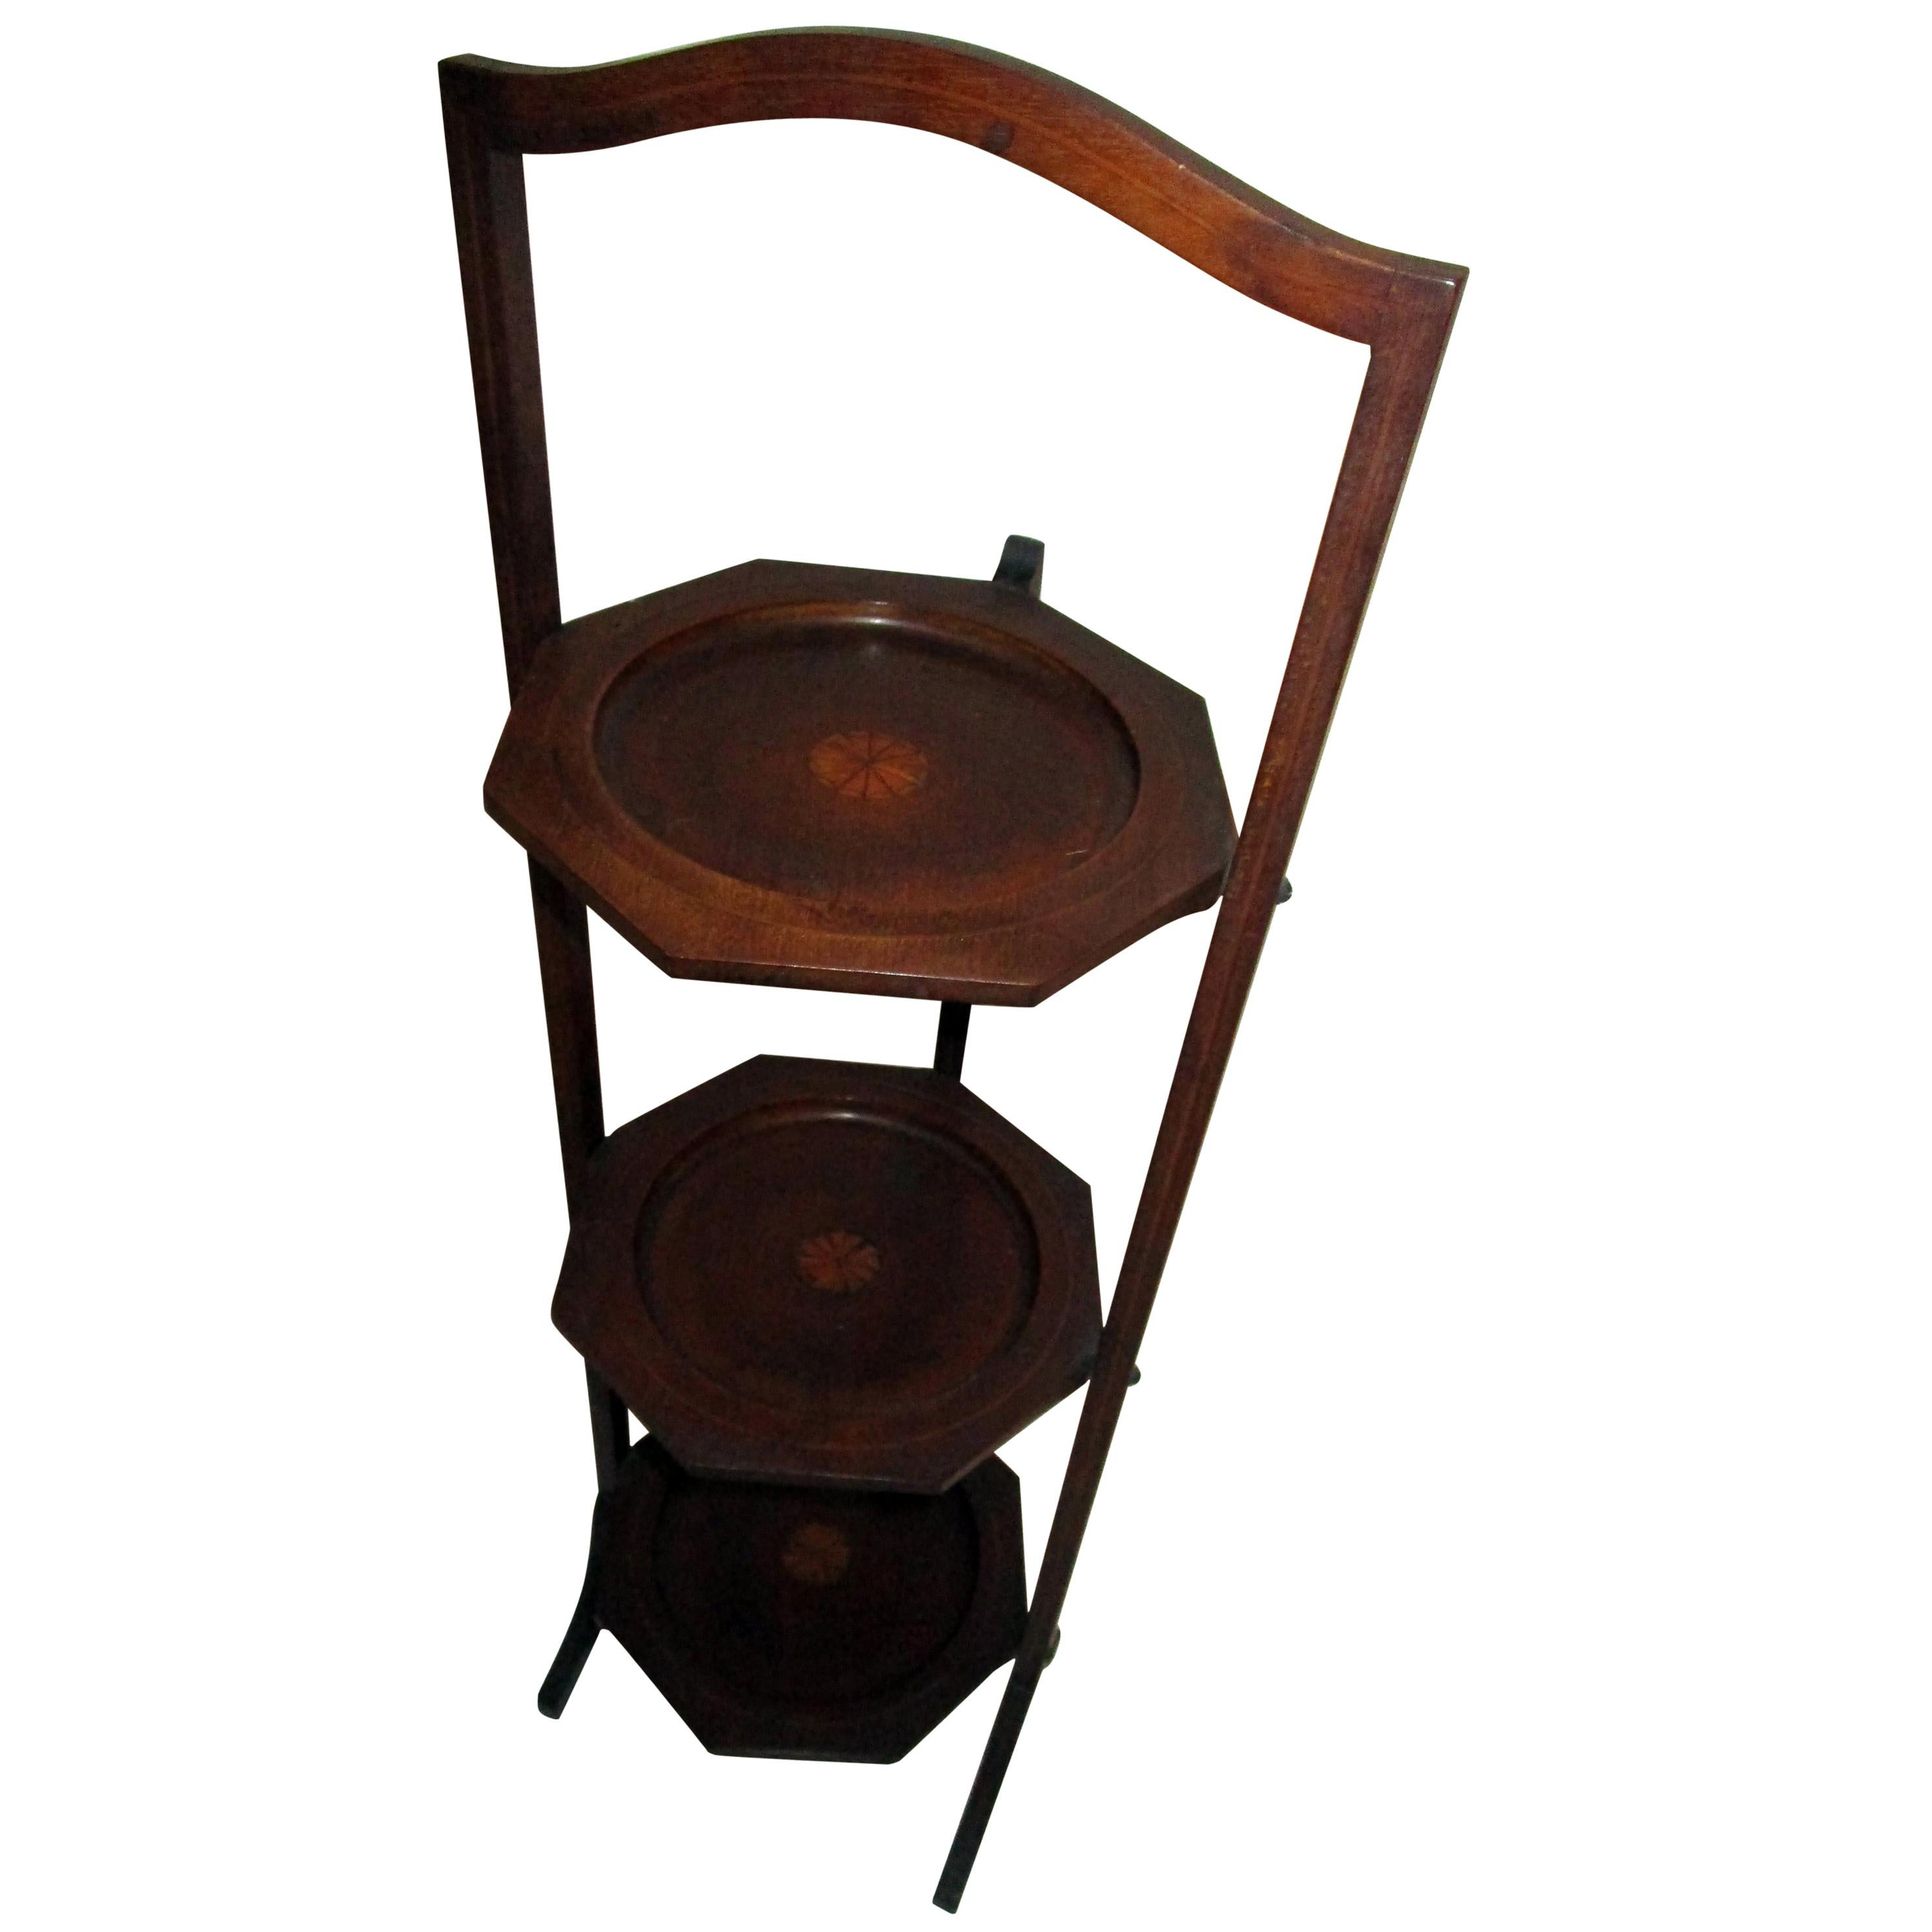 19th century Regency Mahogany Side Table or Muffin Stand